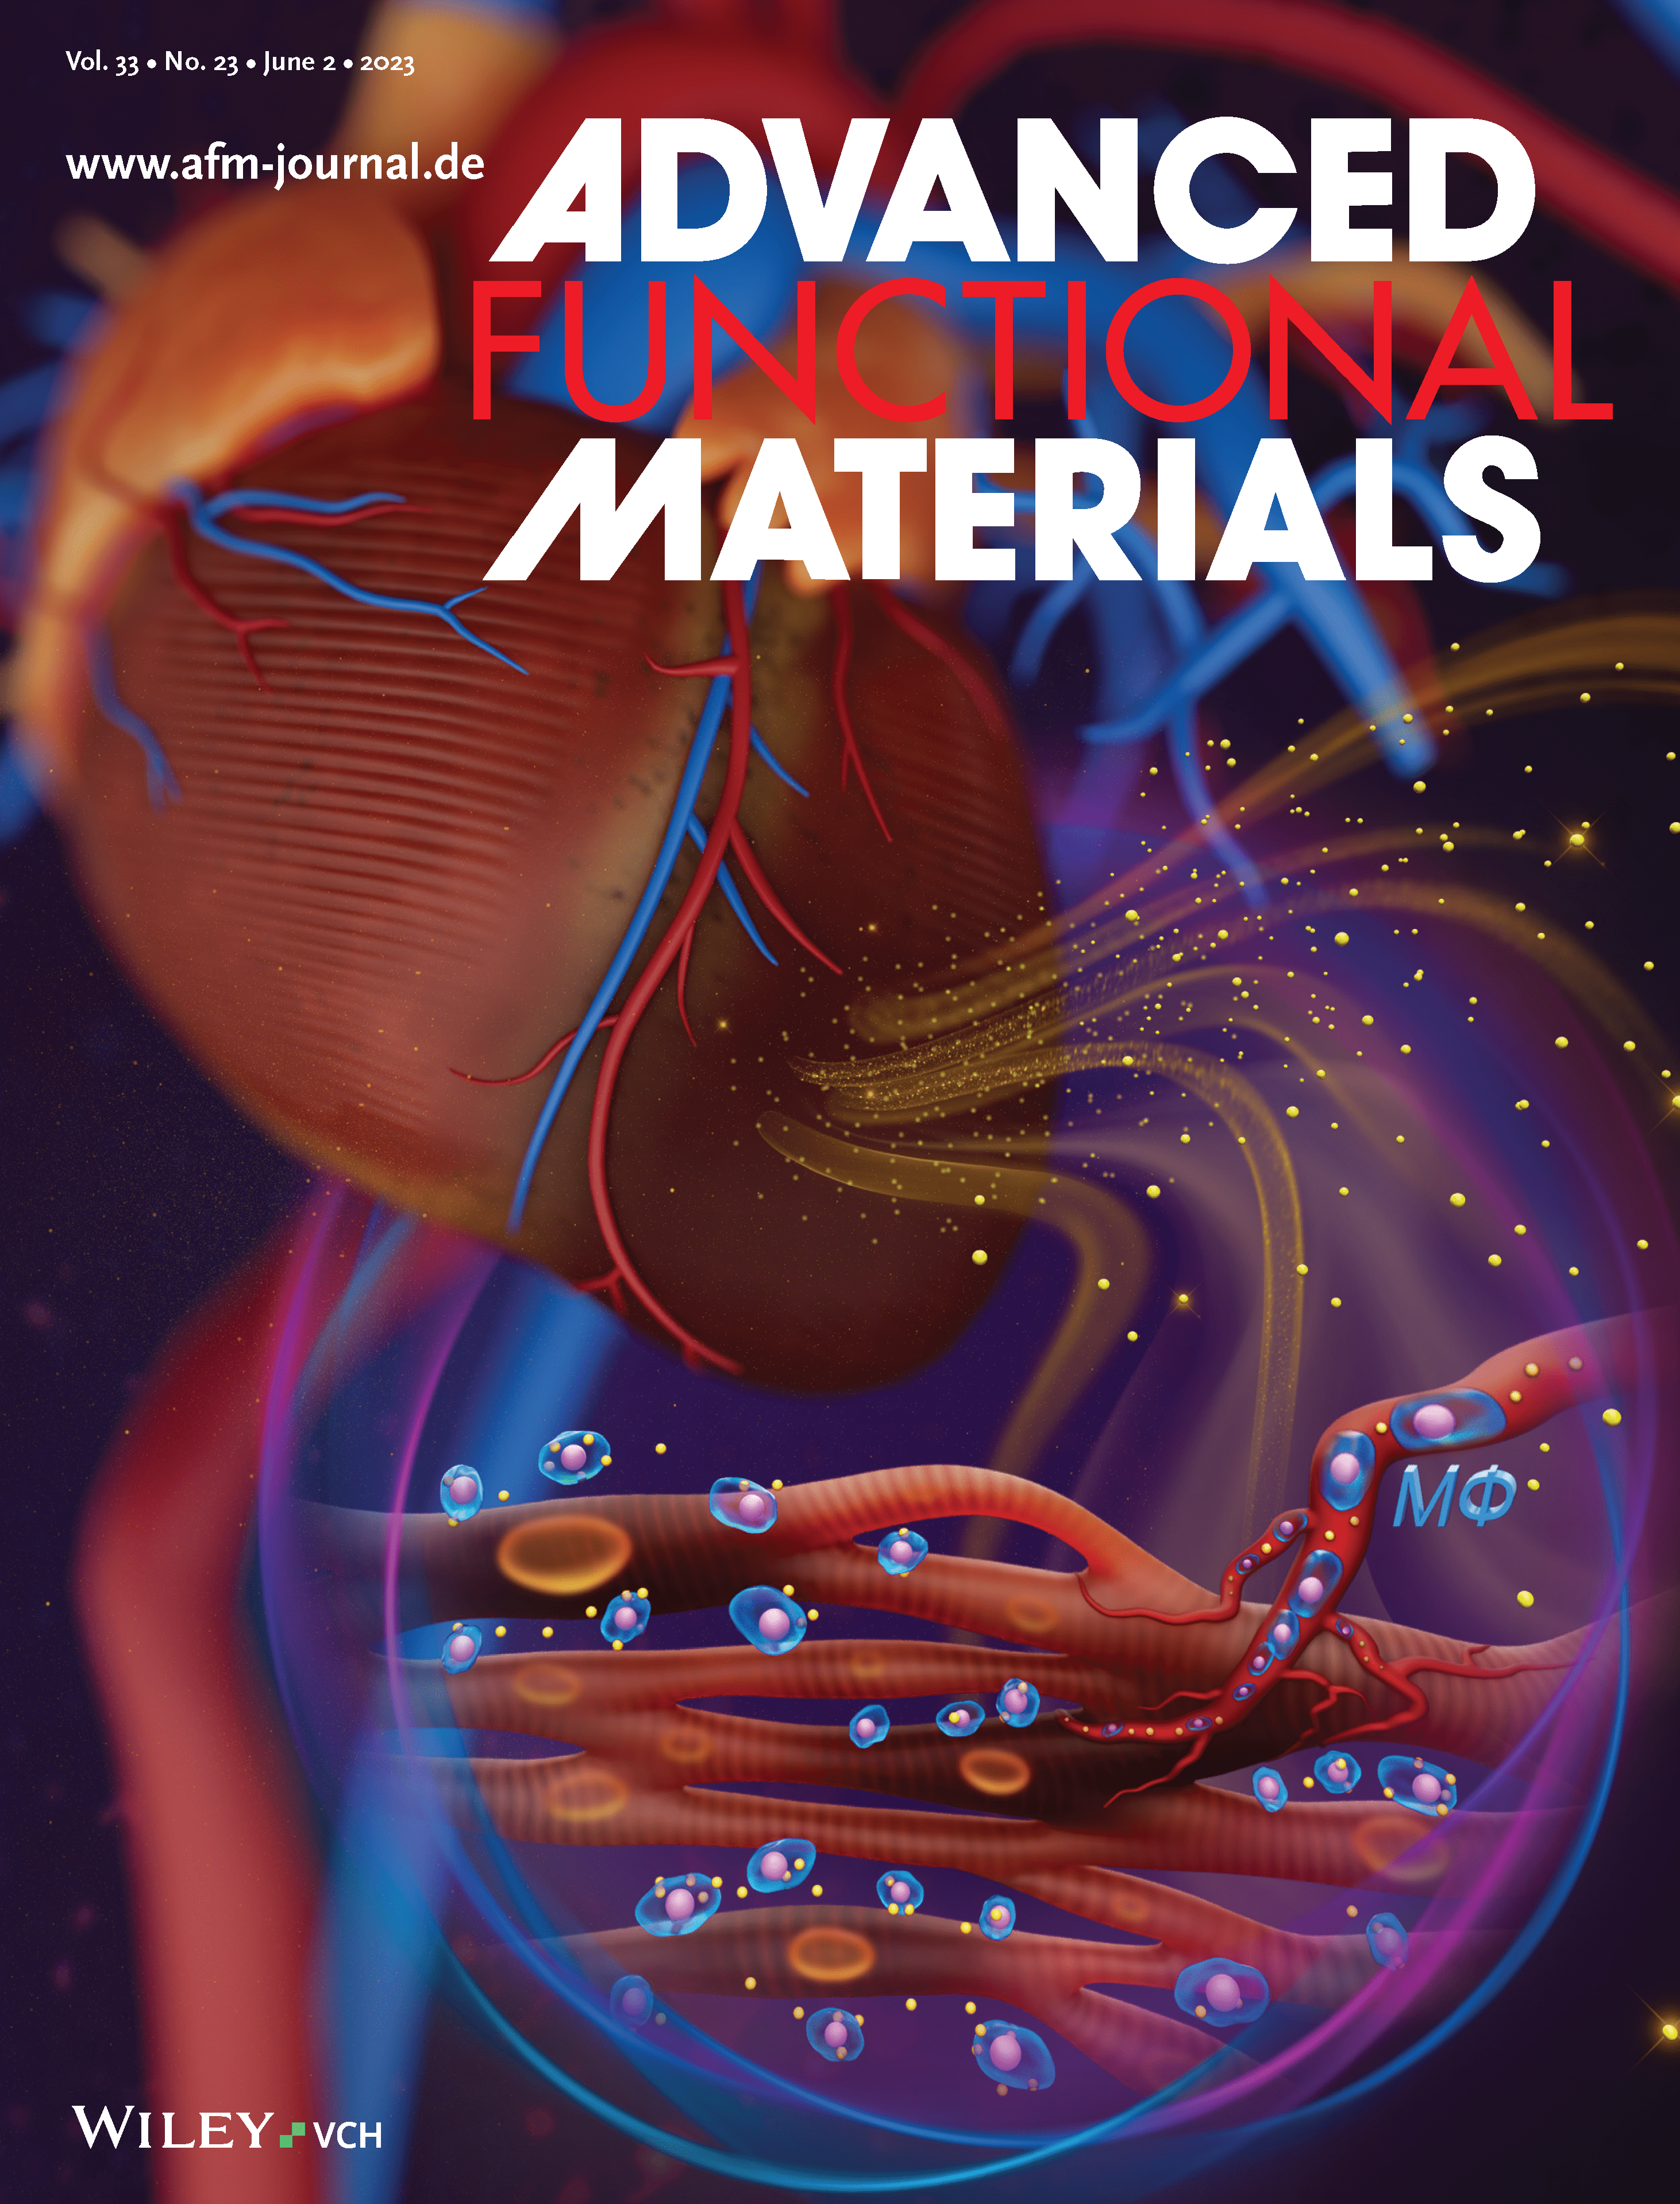 LetPub Journal Cover Art Design - Targeted Delivery of Apoptotic Cell-Derived Nanovesicles prevents Cardiac Remodeling and Attenuates Cardiac Function Exacerbation